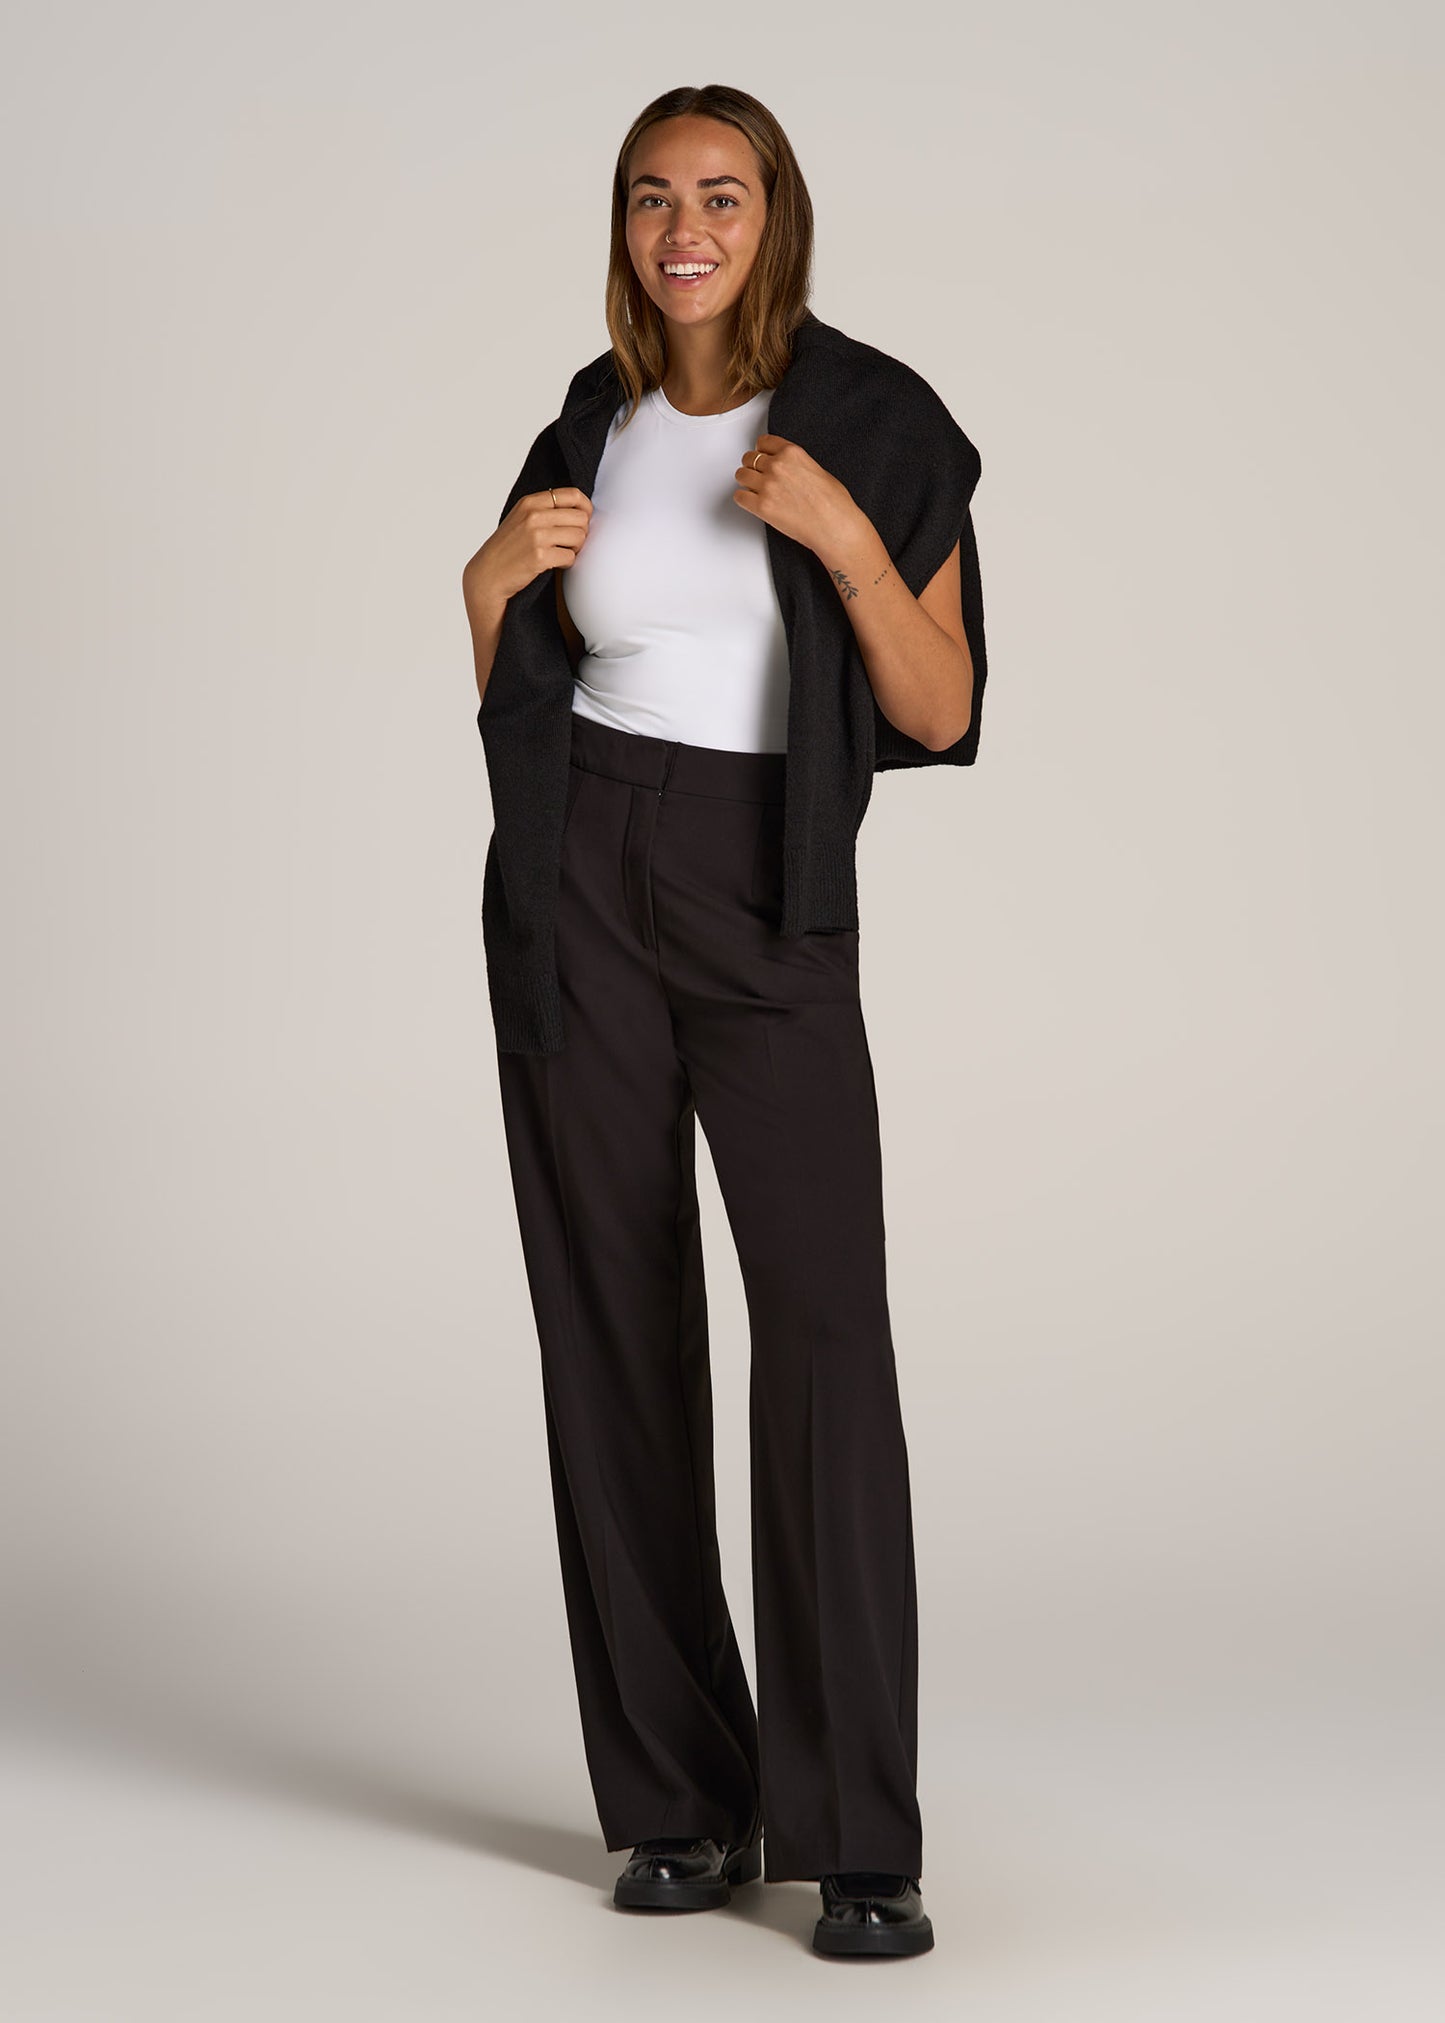 Flat Front Wide Leg Dress Pants for Tall Women in Smoky Pine